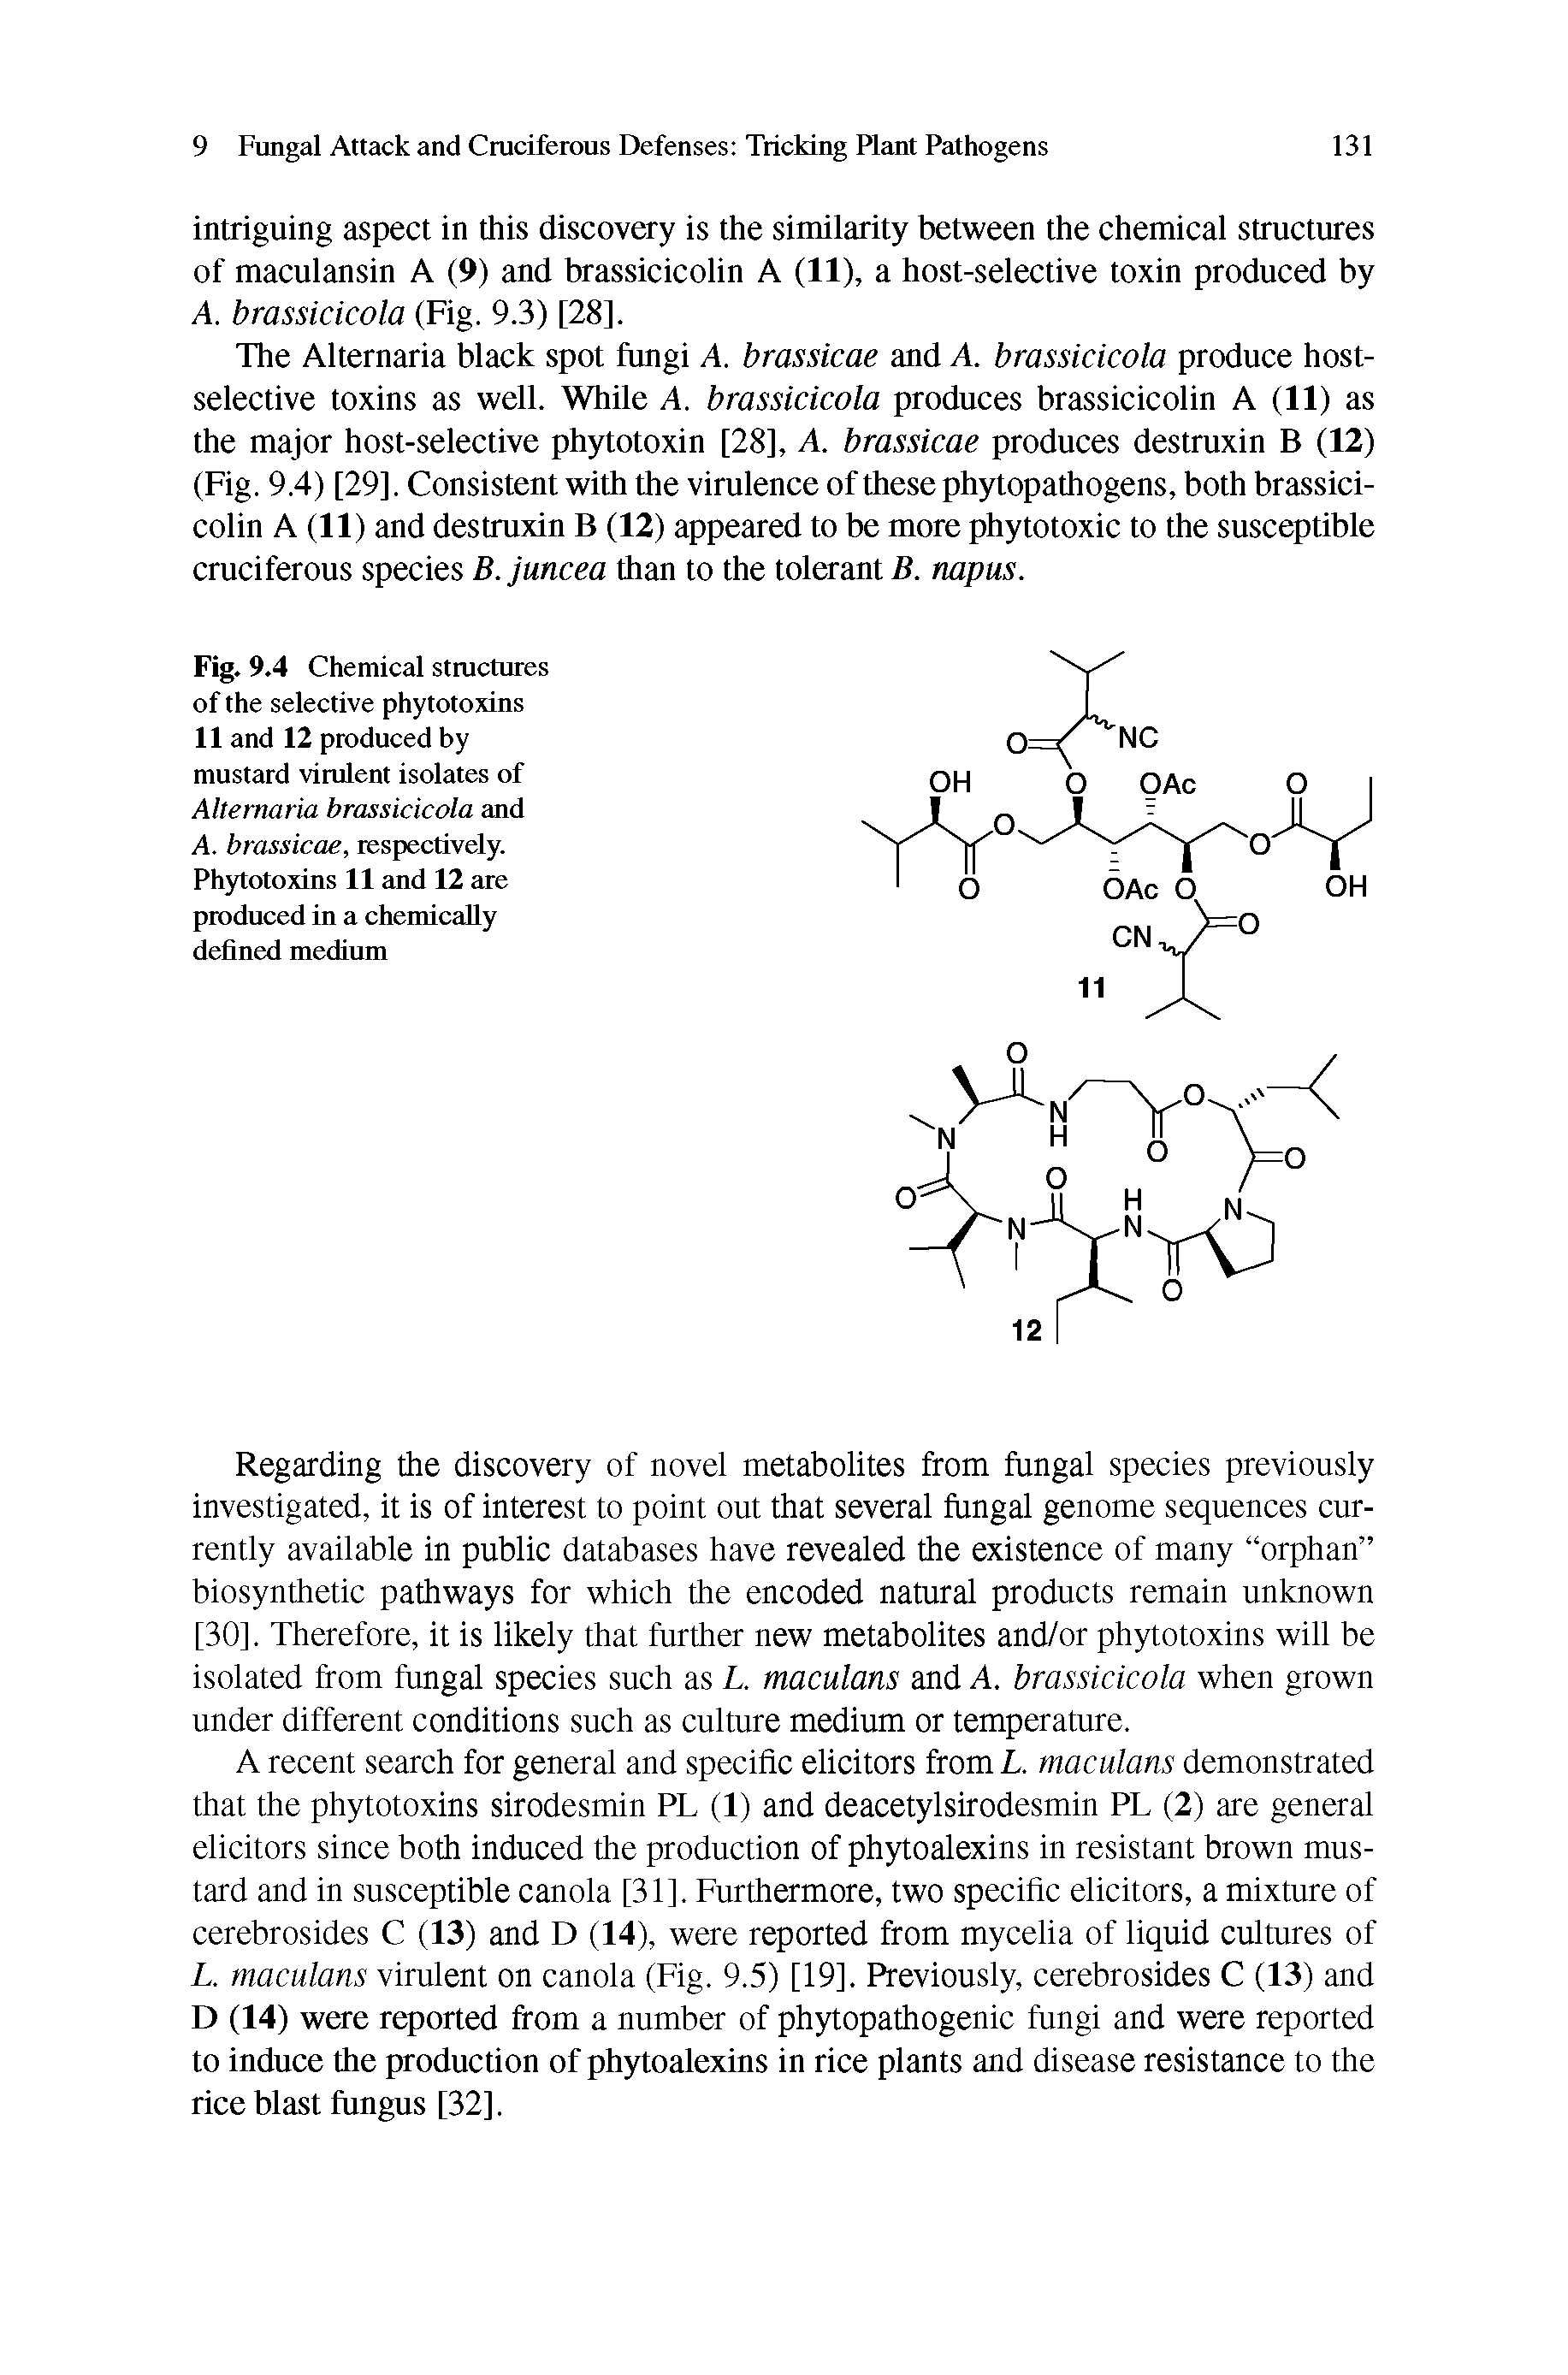 Fig. 9.4 Chemical structures of the selective phytotojdns 11 and 12 produced by mustard virulent isolates of Alternaria brassicicola and A. brassicae, respectively. Phytotoxins 11 and 12 are produced in a chemically defined medium...